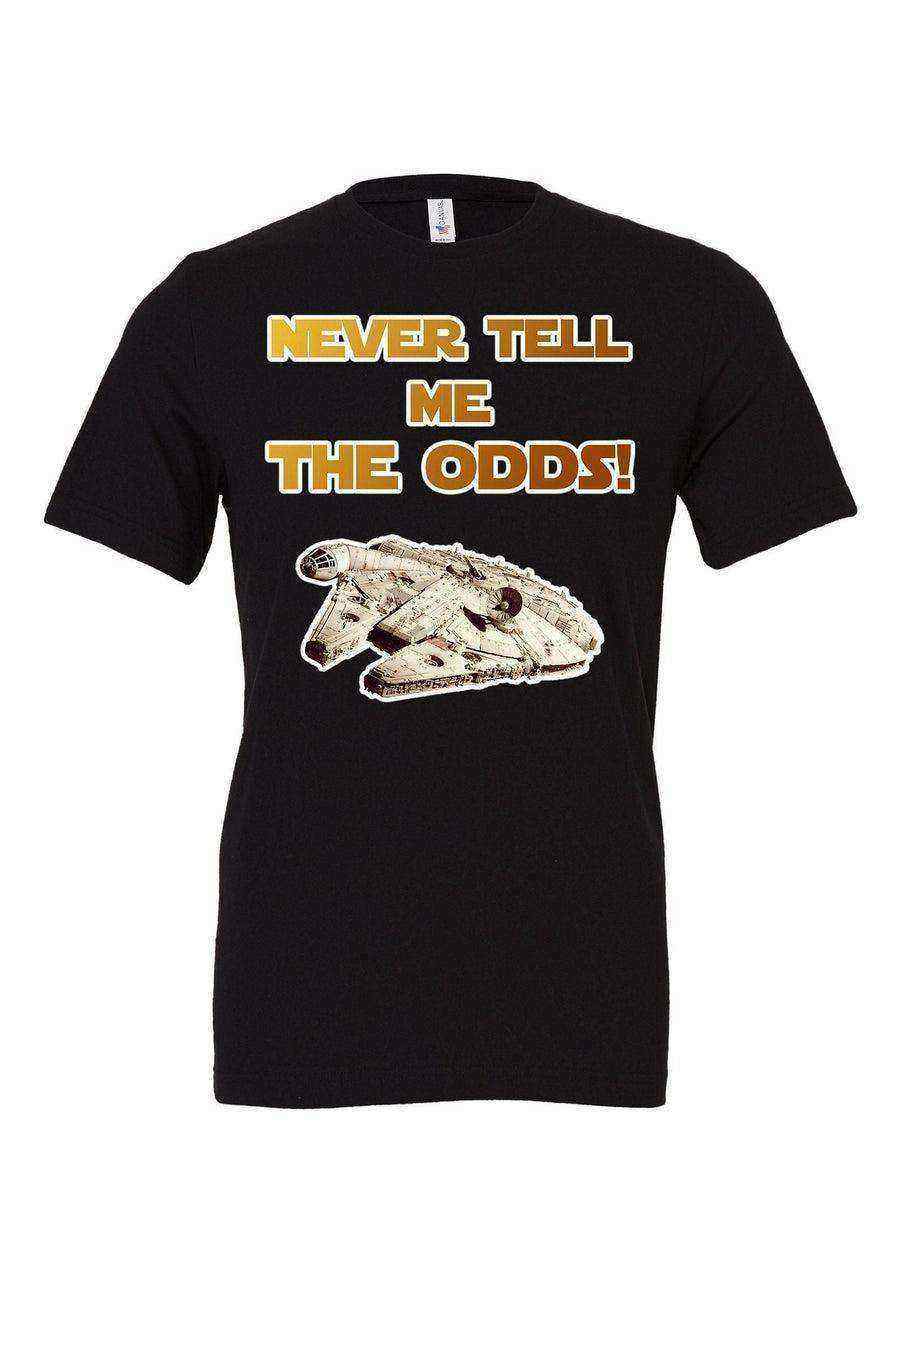 Toddler | Star Wars Han Solo Tee | Never Tell Me The Odds - Dylan's Tees